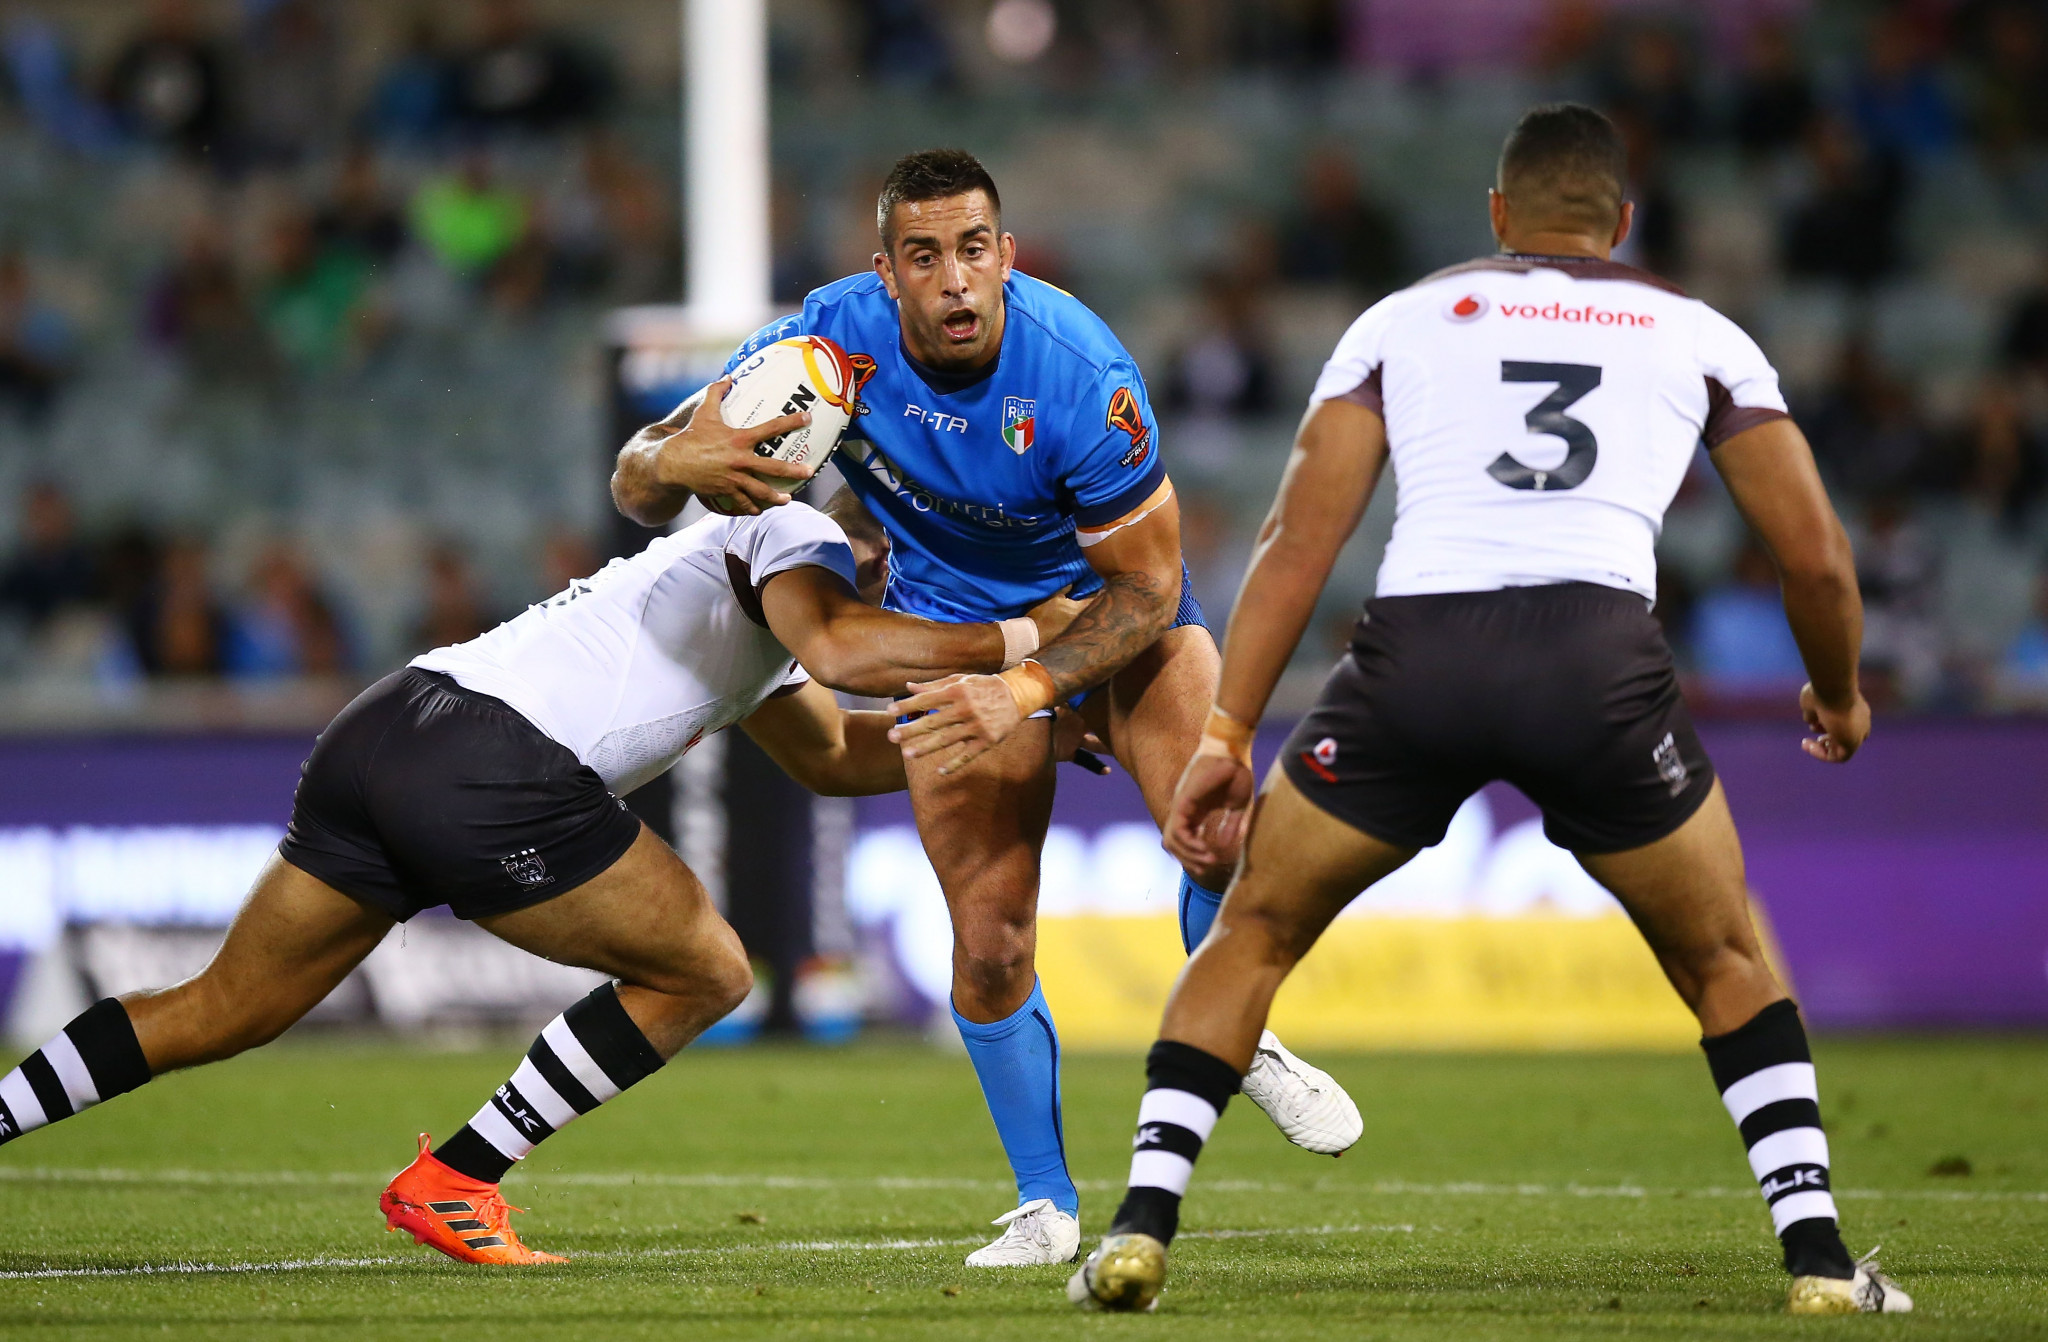 Fiji thrash Italy to reach Rugby League World Cup quarter-finals